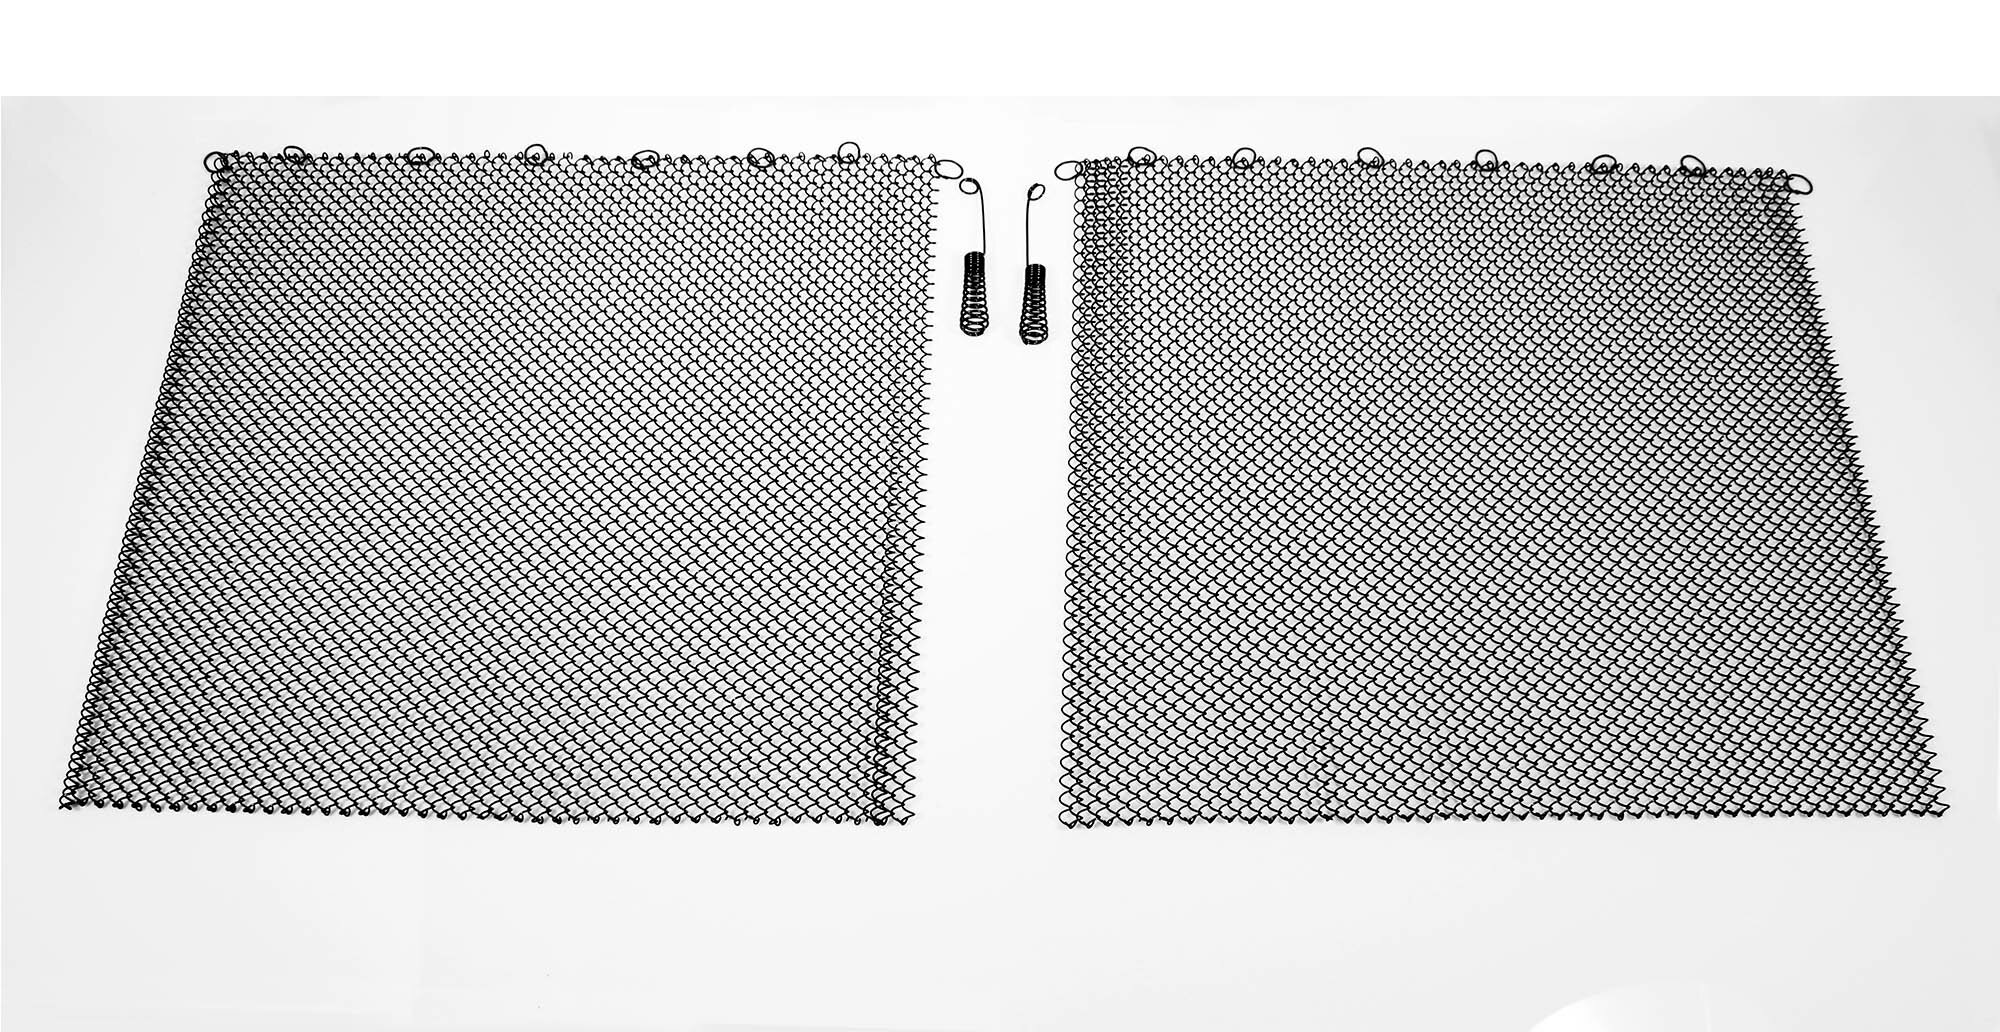 Fireplace Mesh Screen Curtain 19 High each 24 Wide. Enhance the Style of Your Fireplace with a Condar Mesh Screen Includes 2 Panels